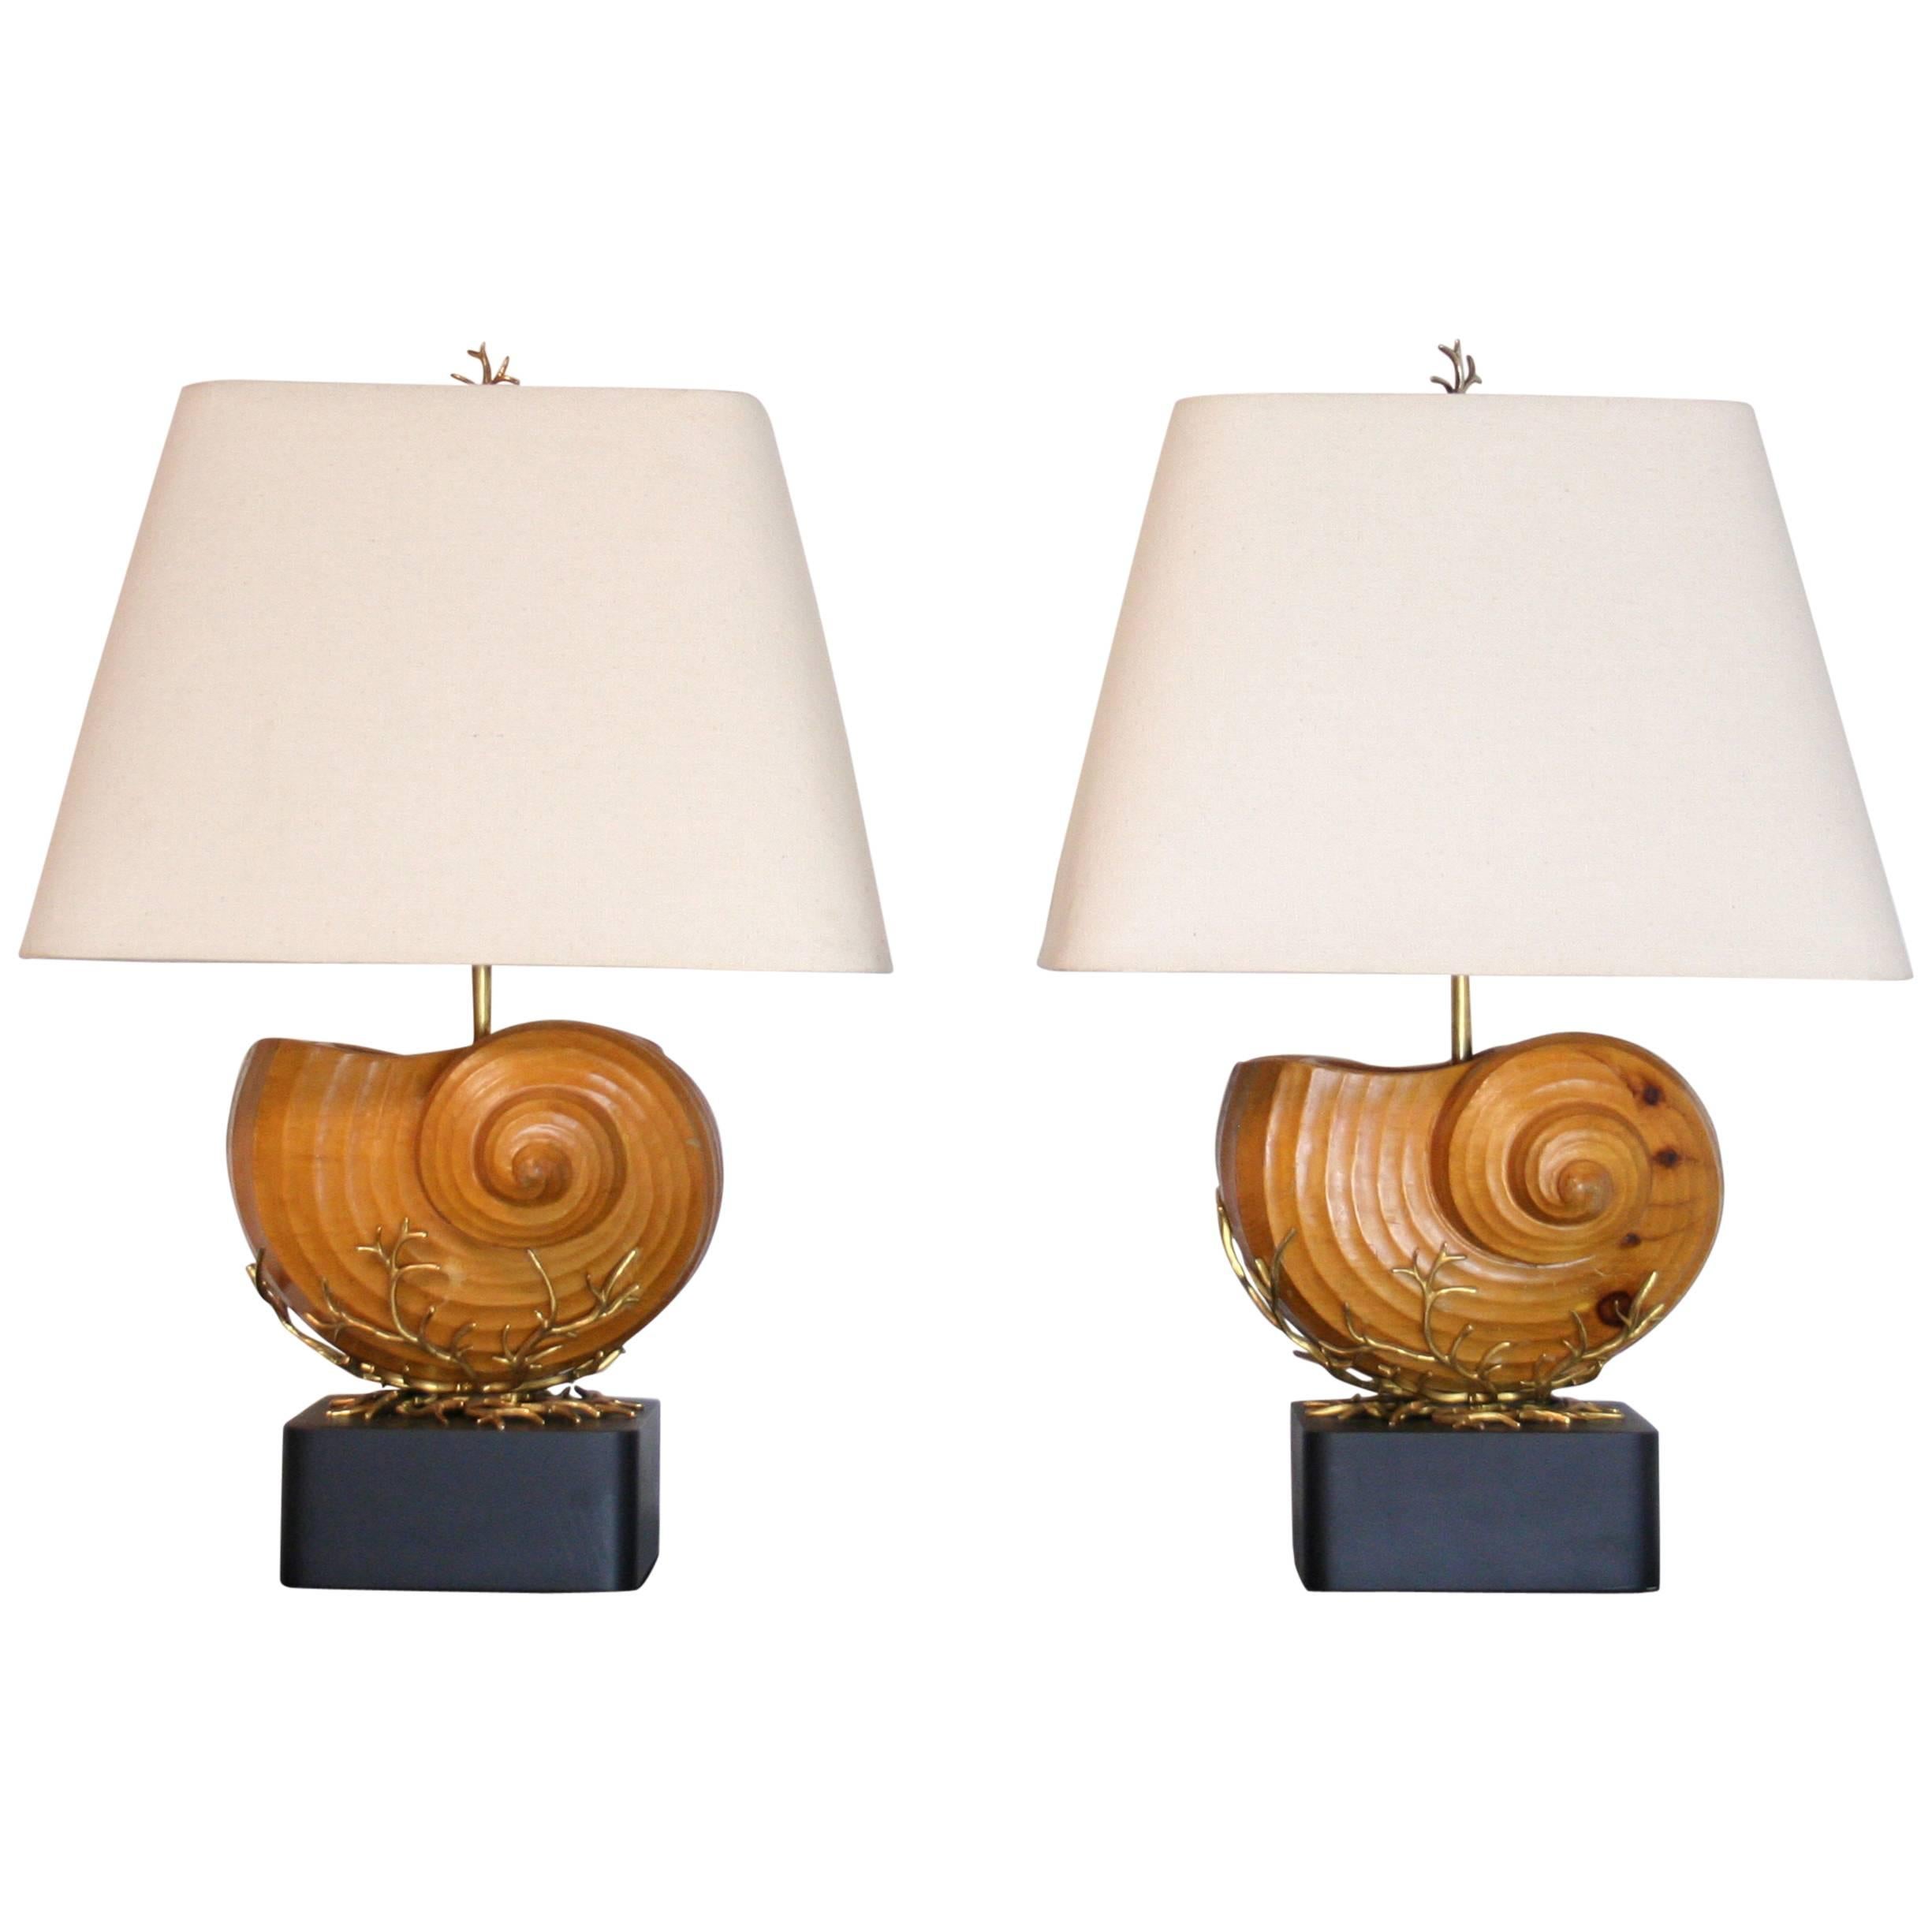 Pair of Carved Wood Nautilus Shell Lamps